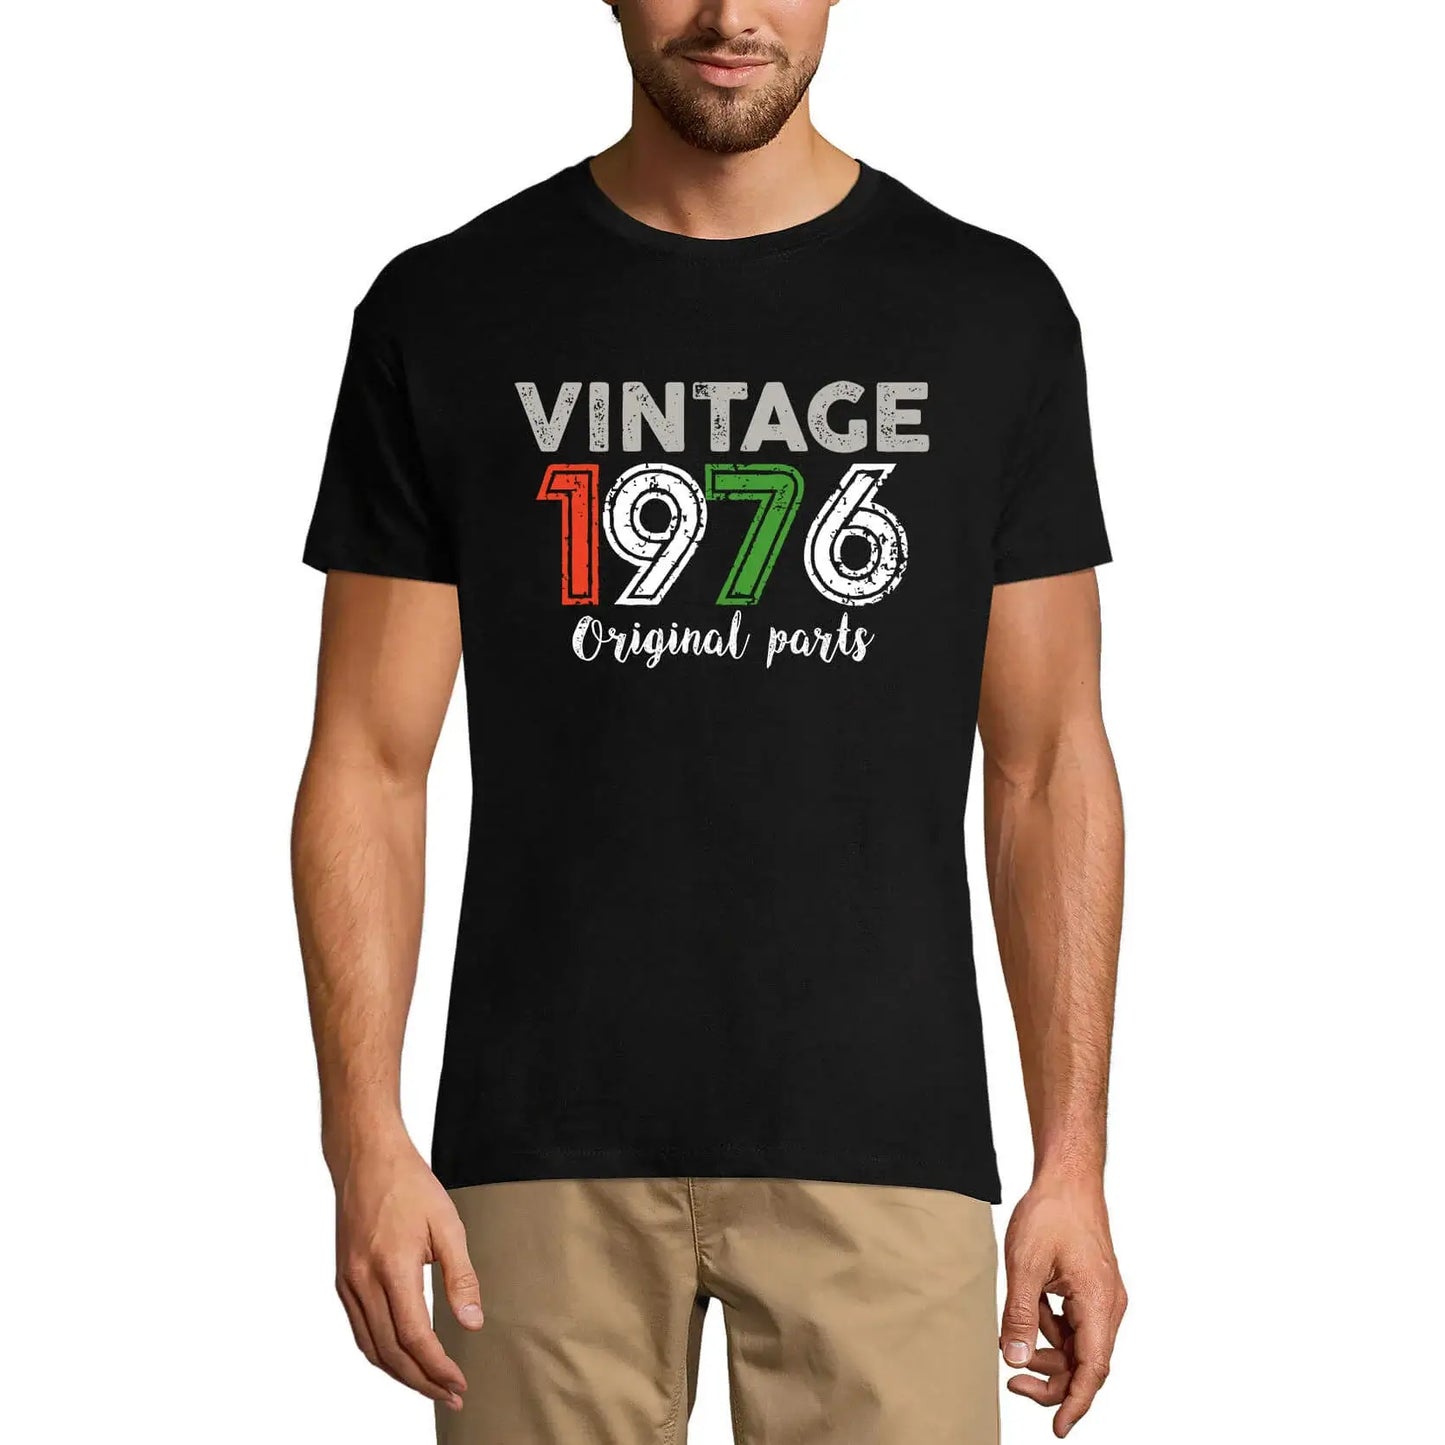 Men's Graphic T-Shirt Original Parts 1976 48th Birthday Anniversary 48 Year Old Gift 1976 Vintage Eco-Friendly Short Sleeve Novelty Tee